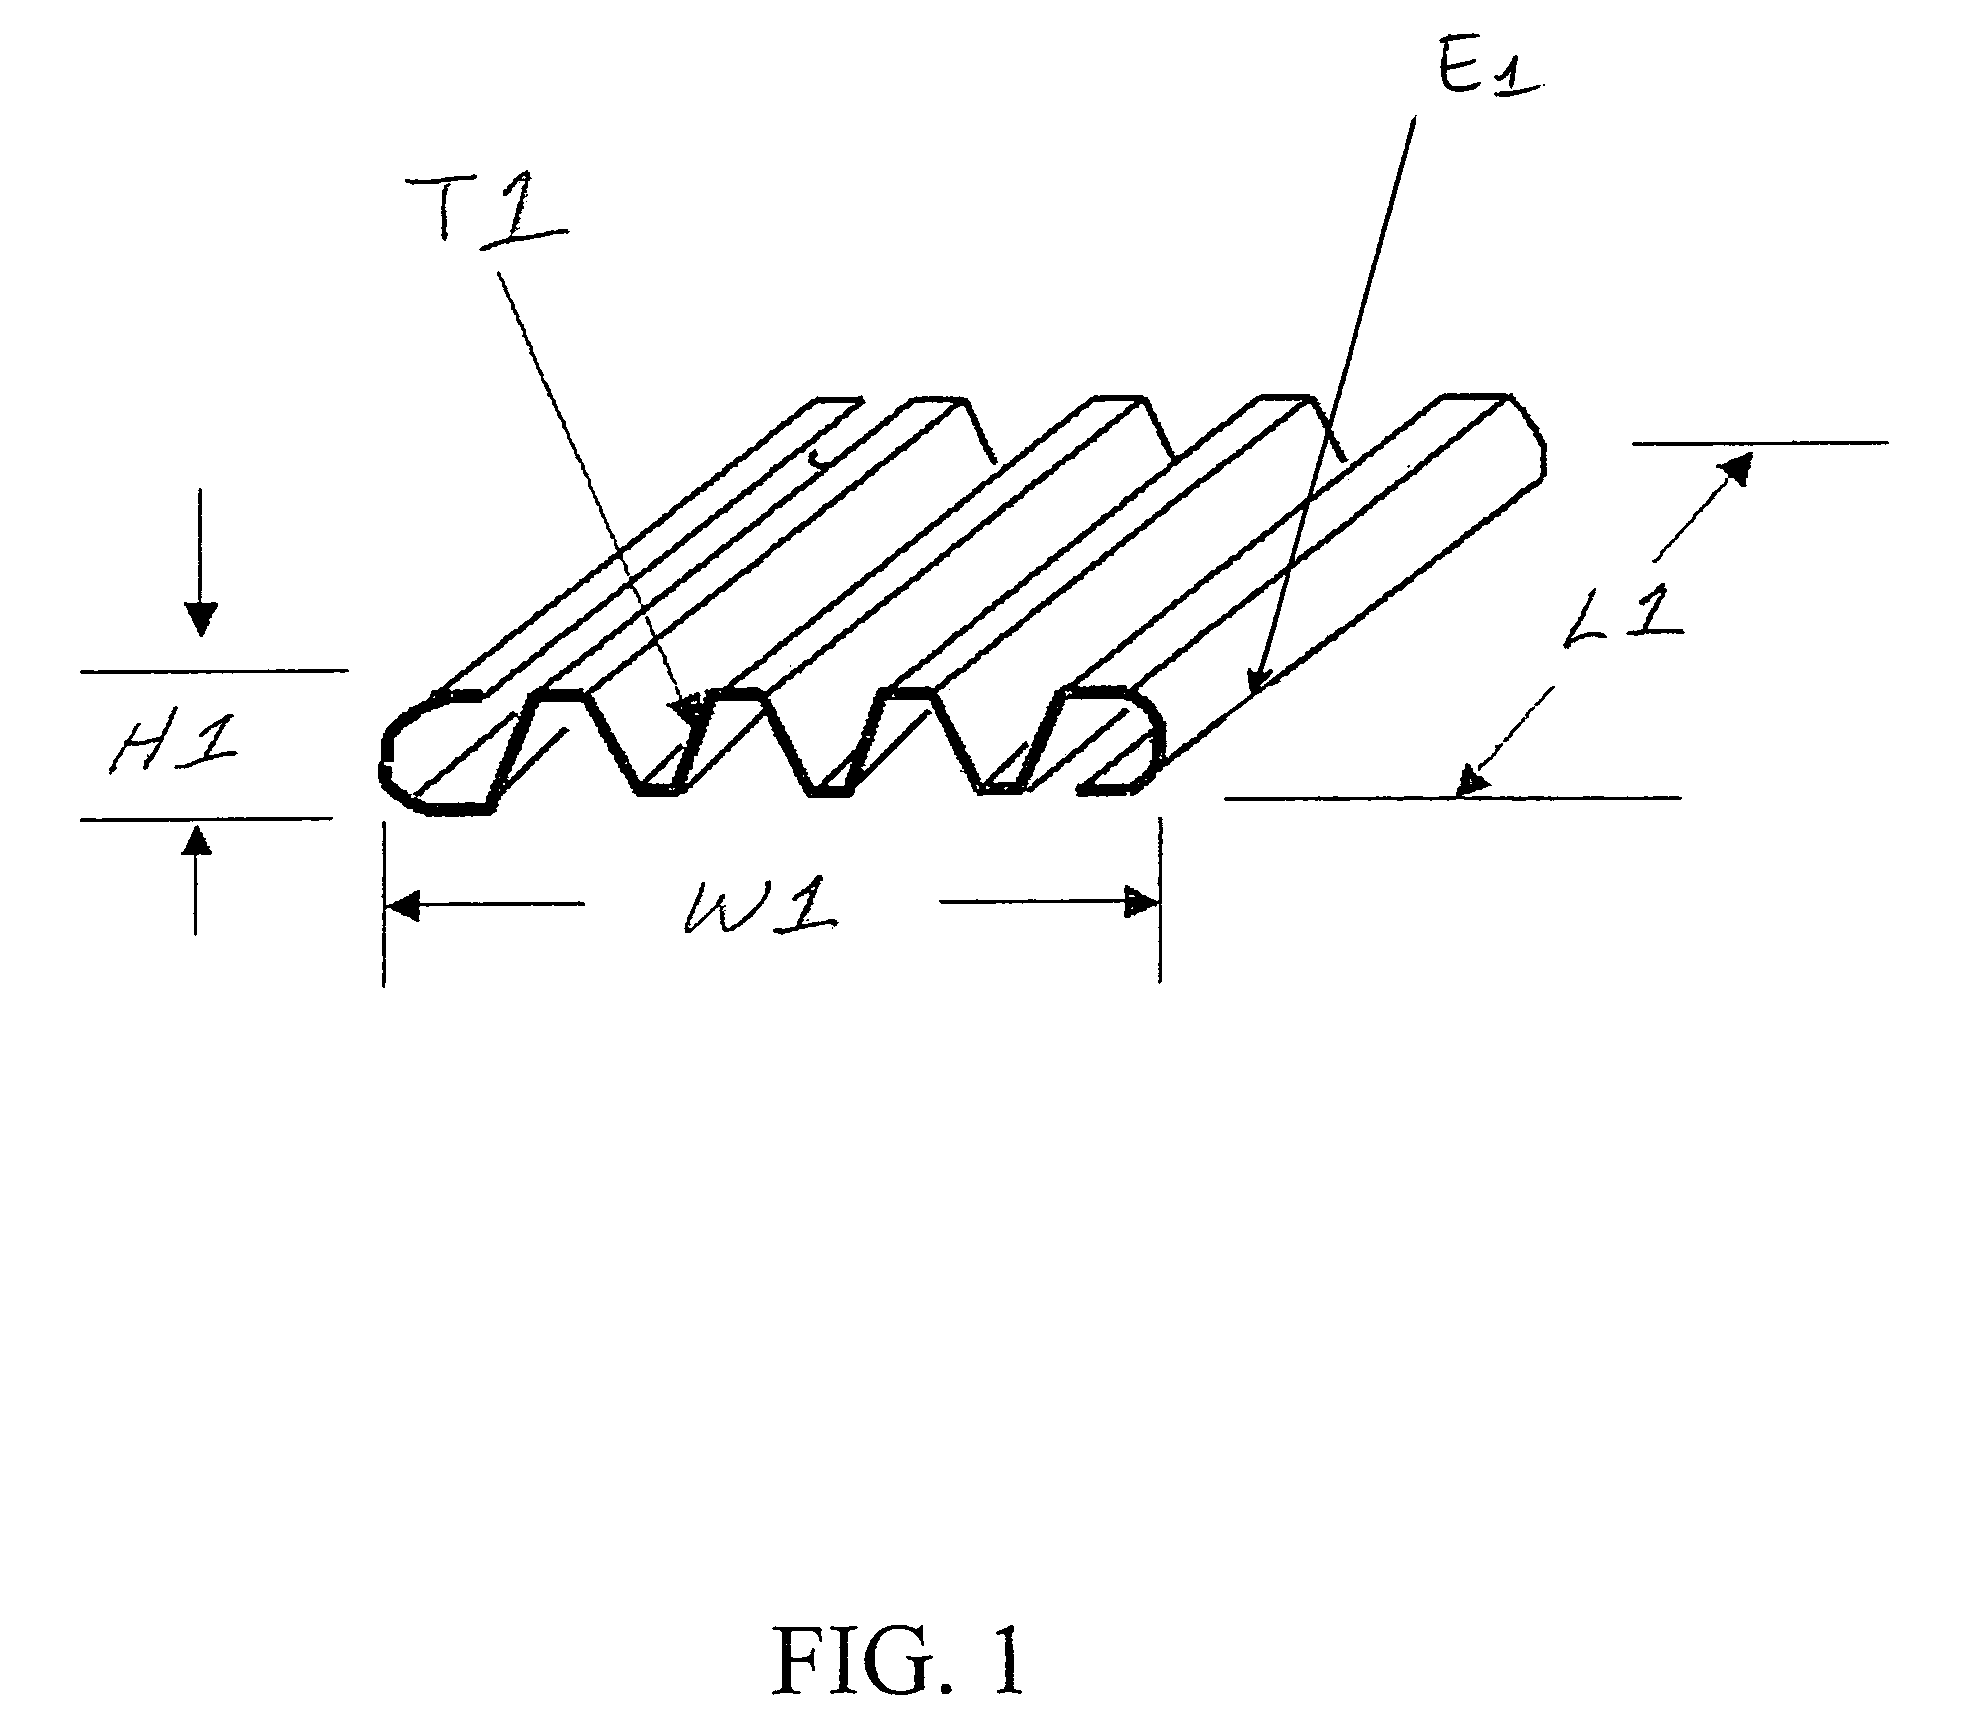 Automotive heat exchanger assemblies having internal fins and methods of making the same